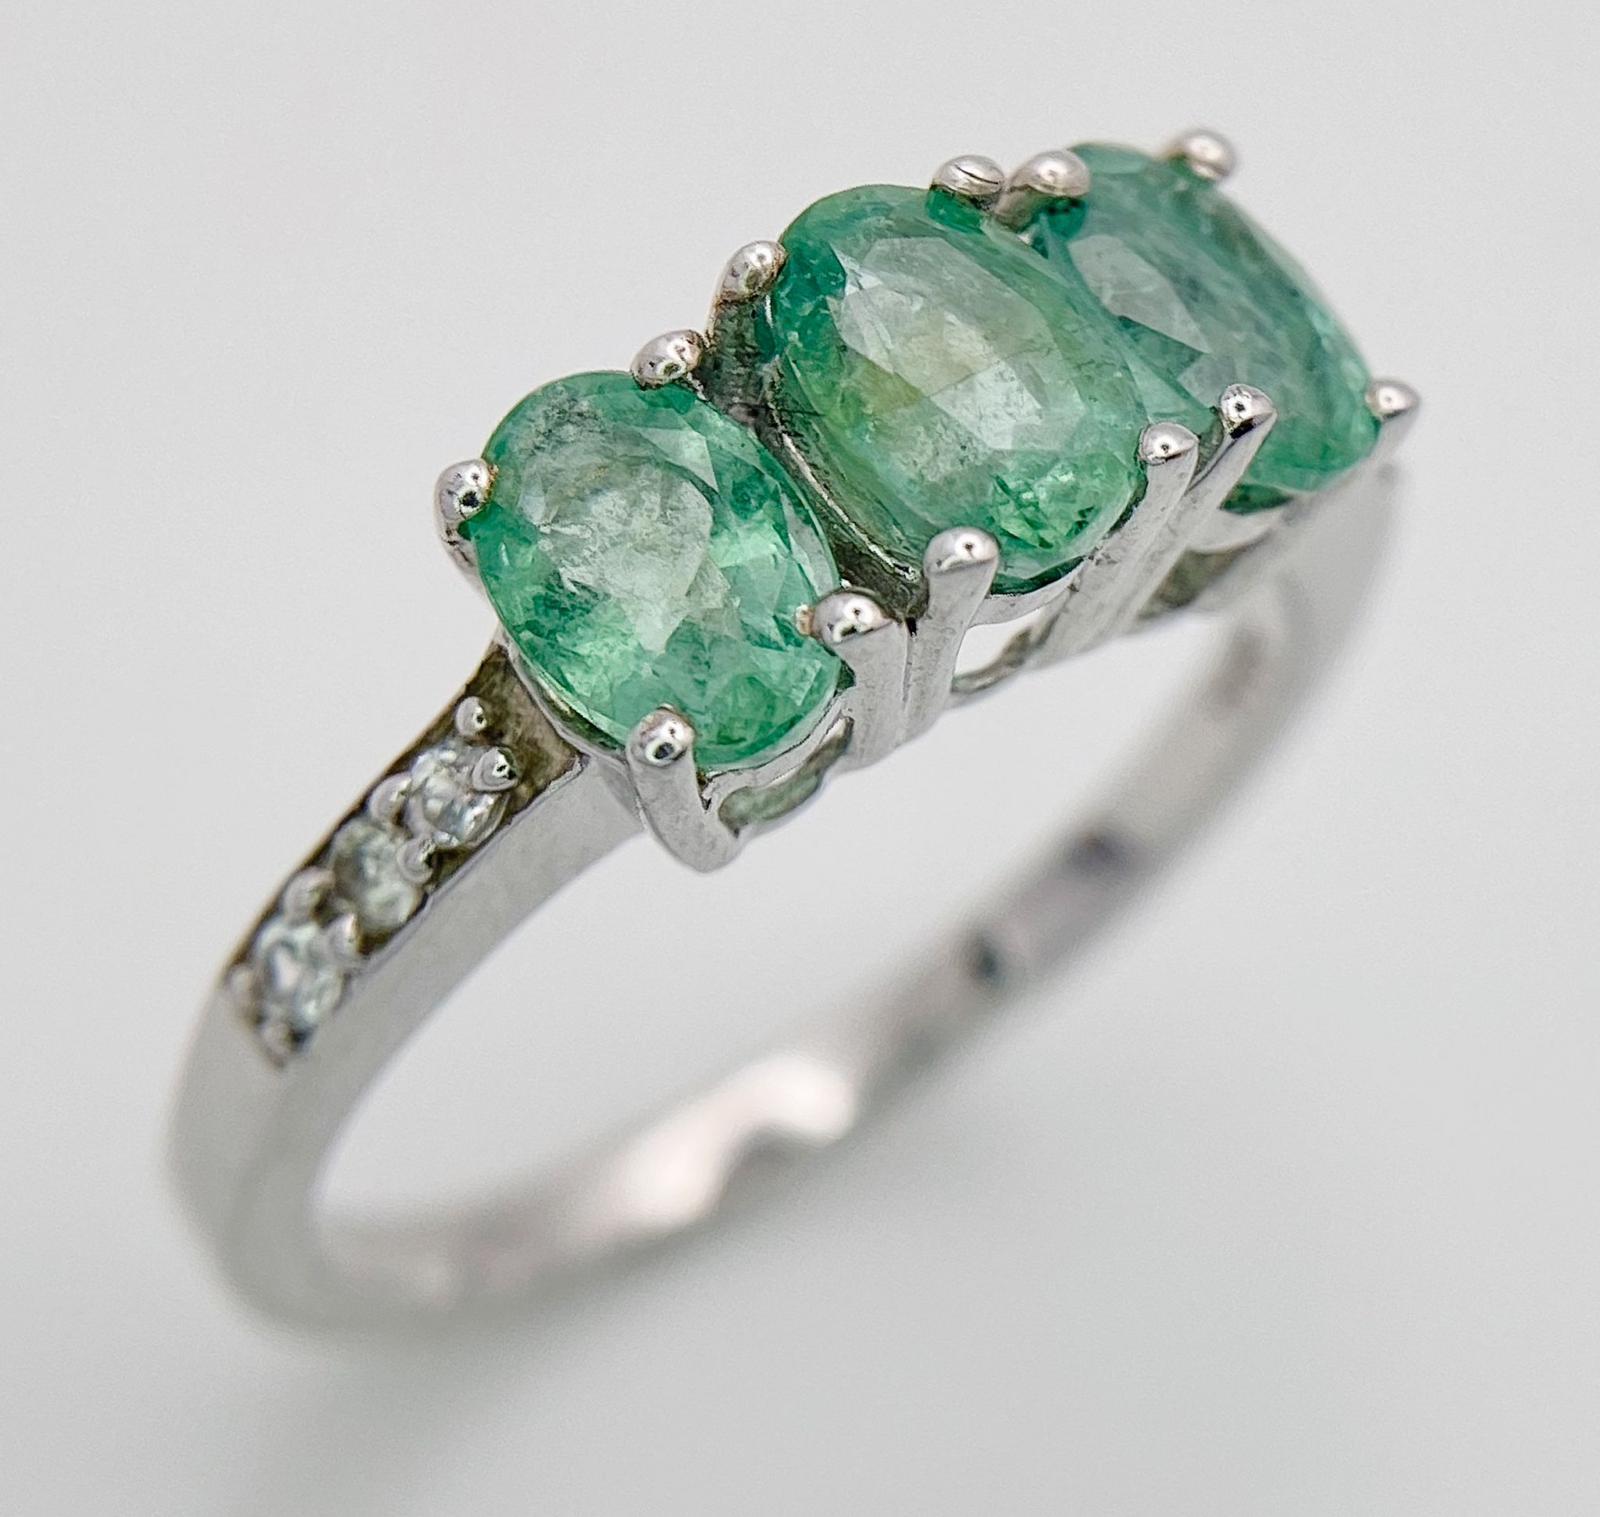 Three 925 Sterling Silver Gemstone Rings: Sapphire- Size P, Emerald - Size N and Topaz - Size S. - Image 5 of 25